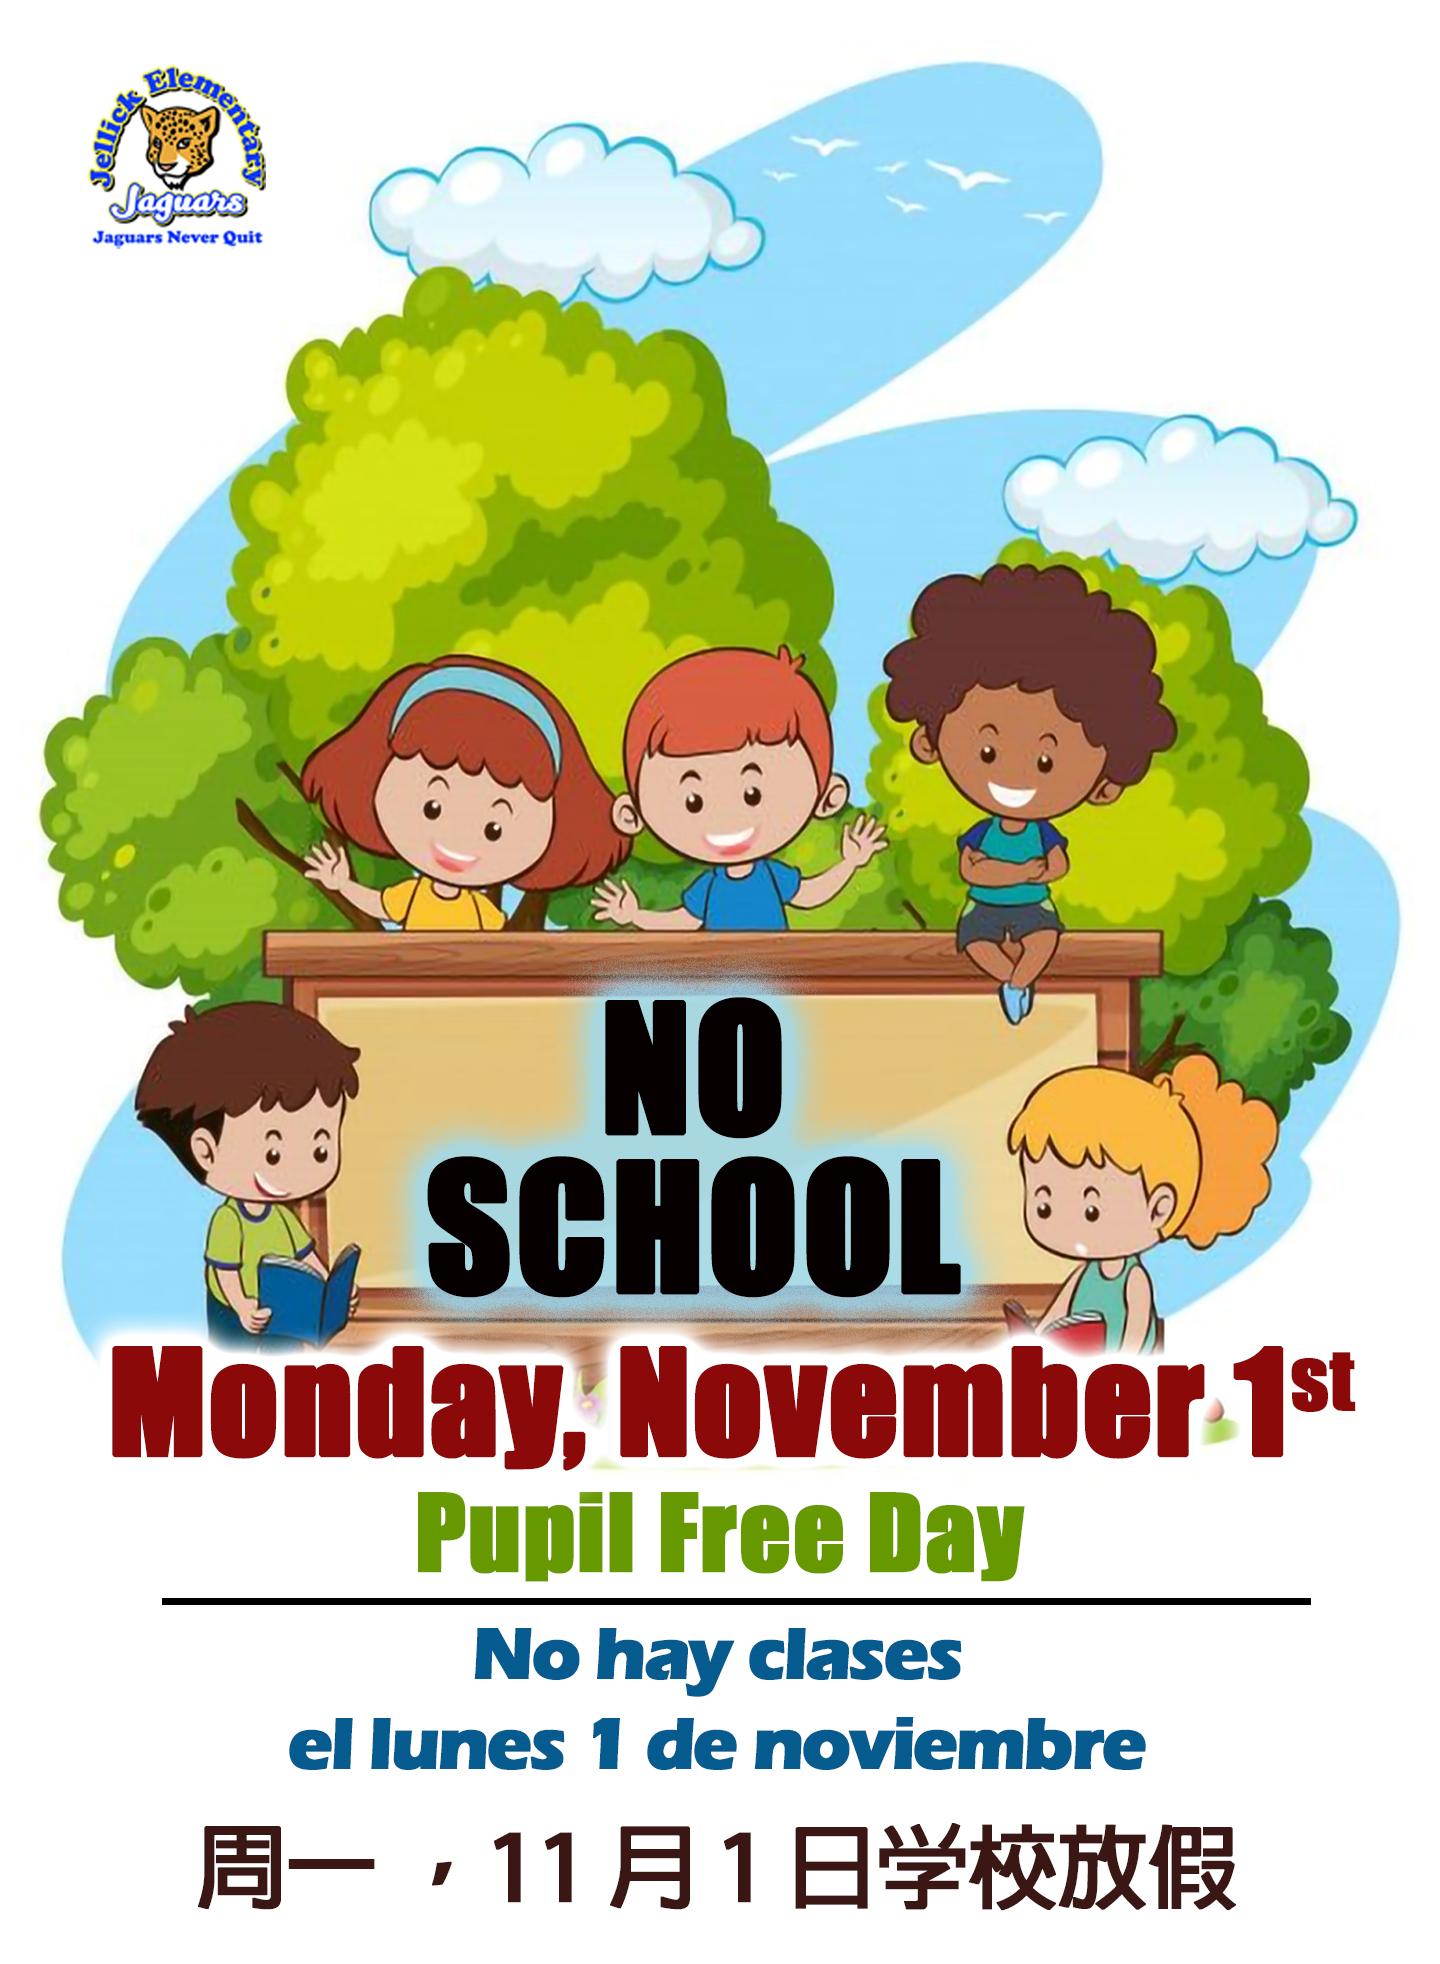 Pupil Free Day